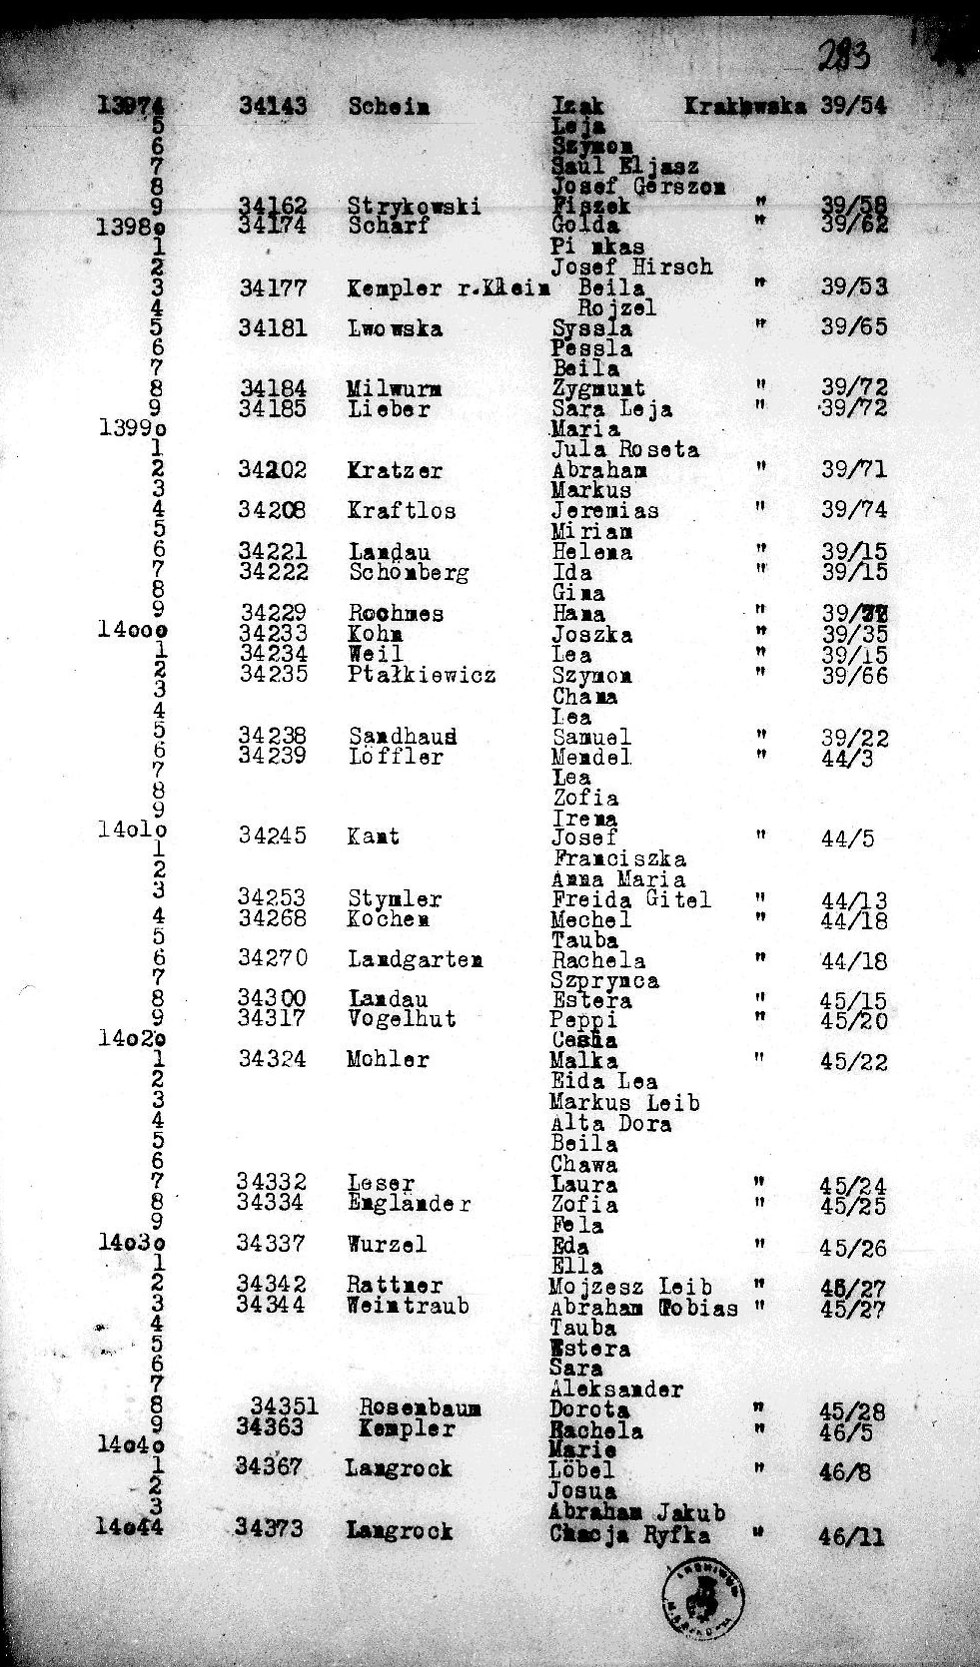 Document with names of Jews and their addresses after the Nazi occupation.